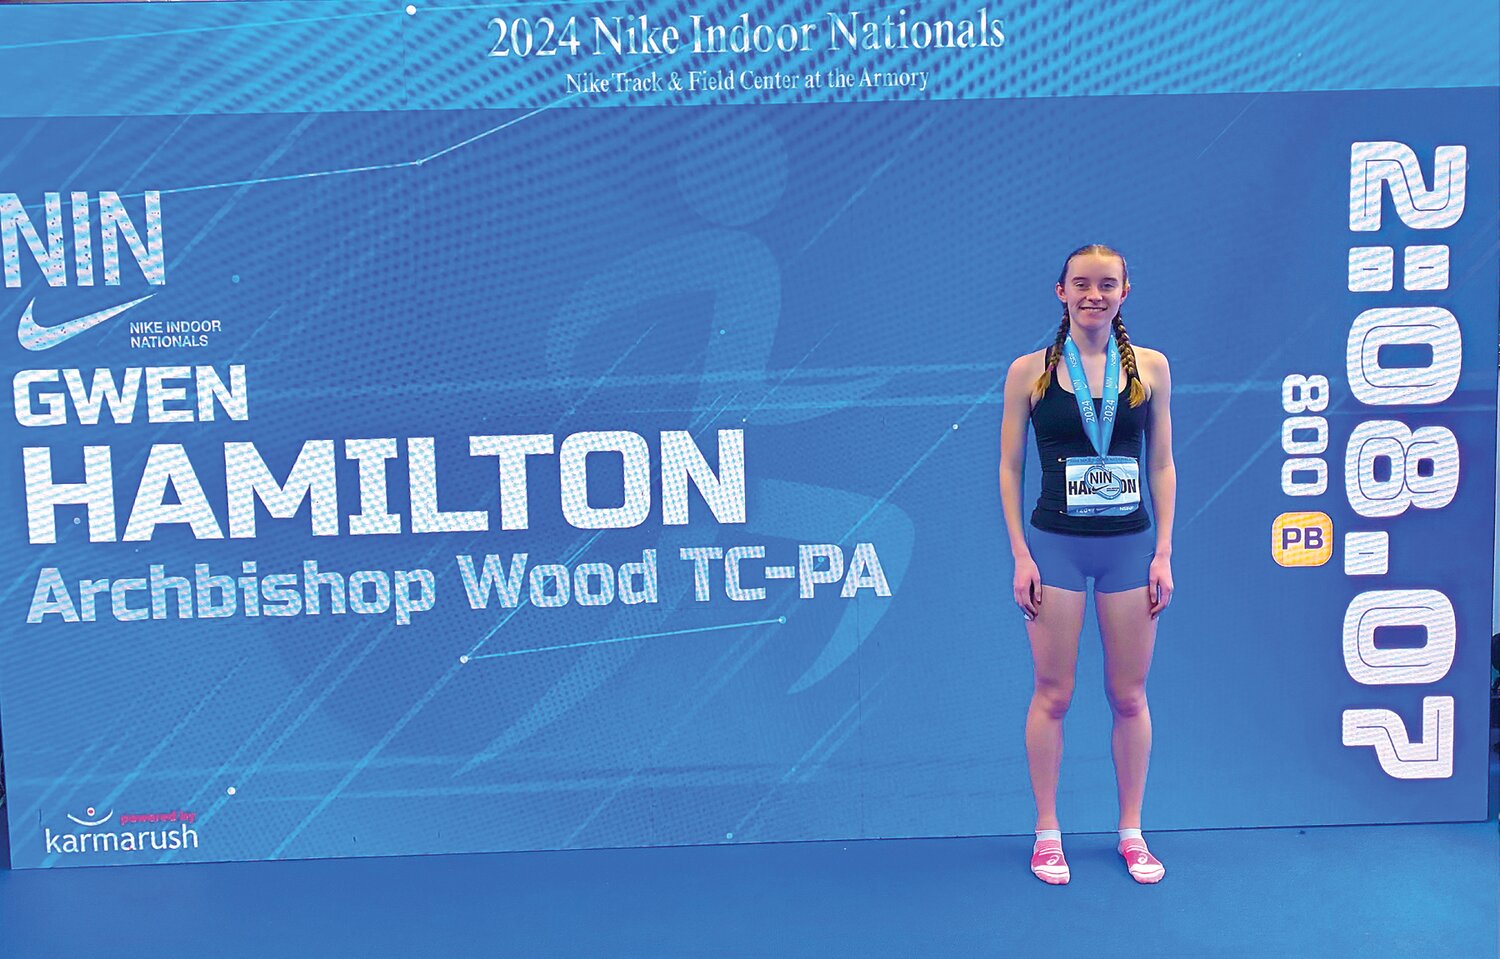 Archbishop Wood’s  Gwen Hamilton took home silver in the 800 meter at the 2024 Nike Indoor Nationals last month.